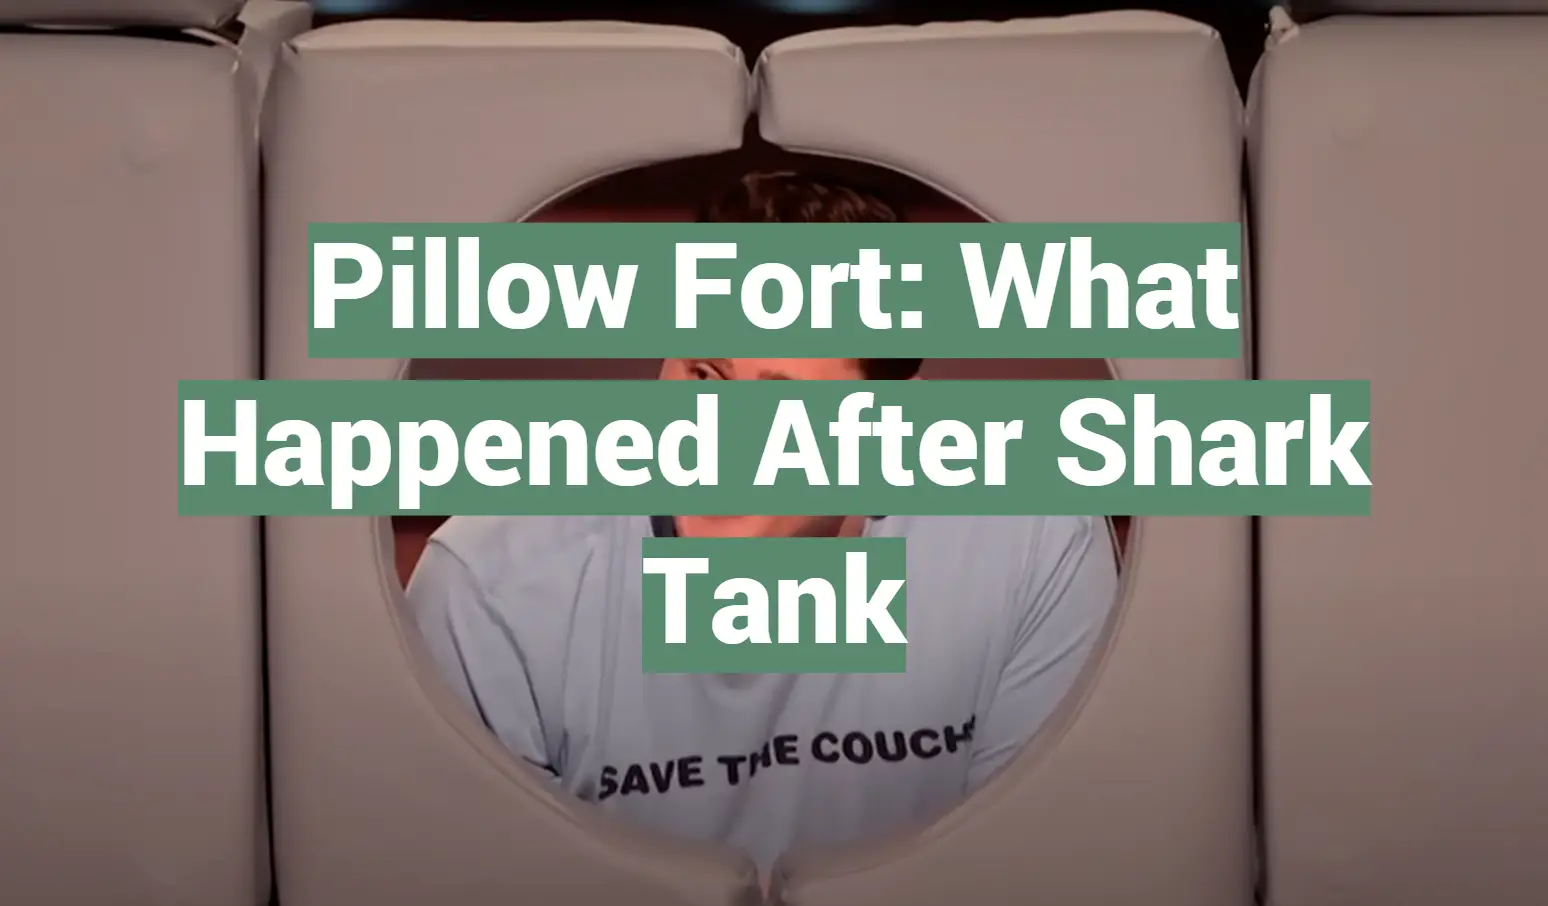 Pillow Fort: What Happened After Shark Tank